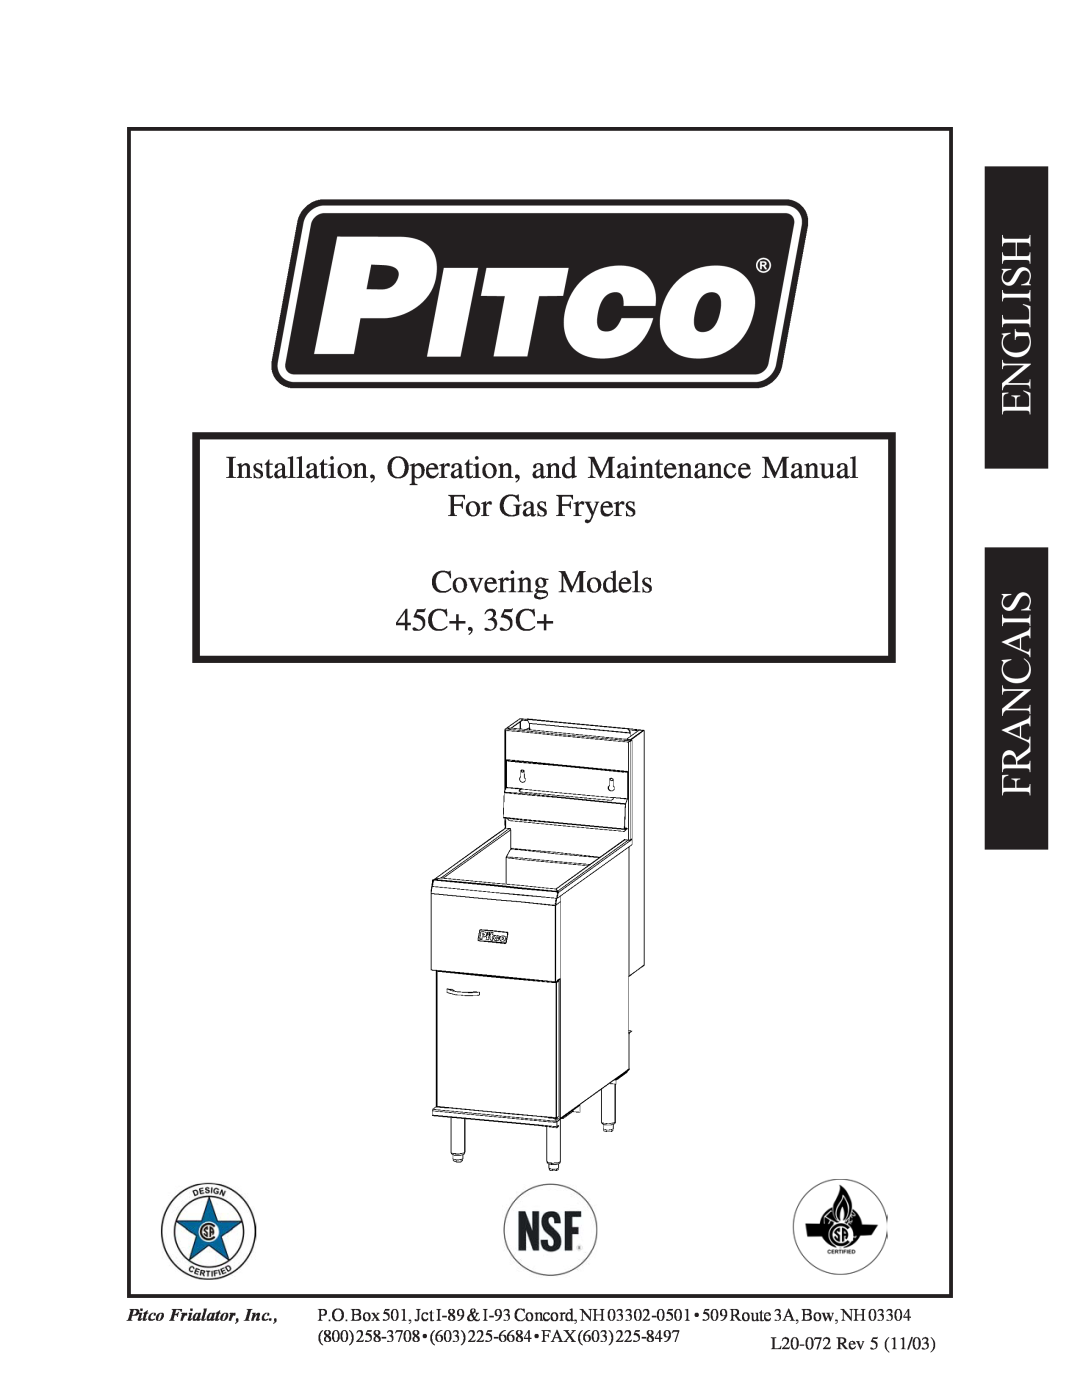 Pitco Frialator manual English Francais, Installation, Operation, and Maintenance Manual, For Gas Fryers, 45C+, 35C+ 